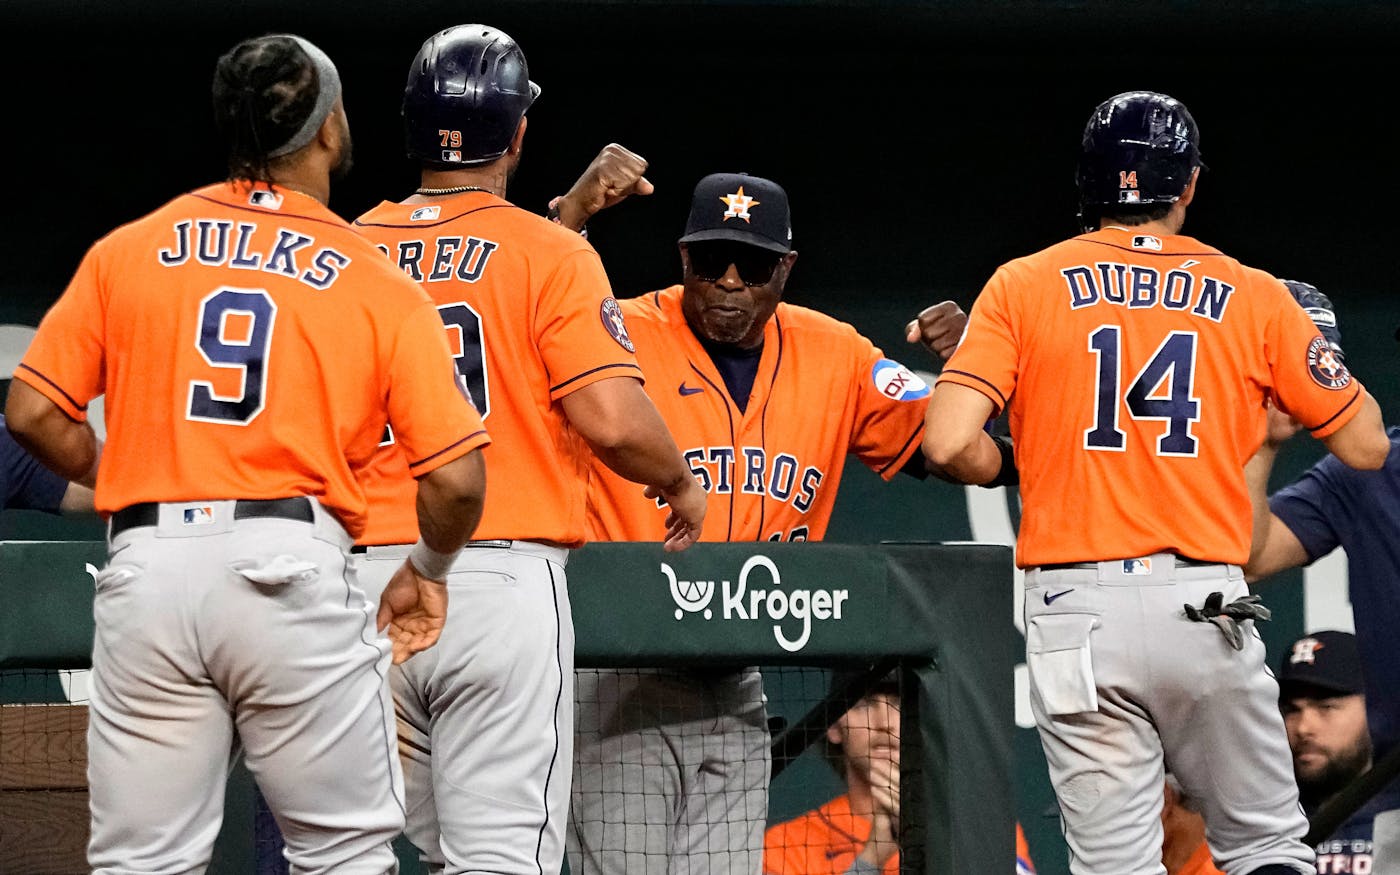 Where Do the Astros Keep Finding These Unsung Heroes?